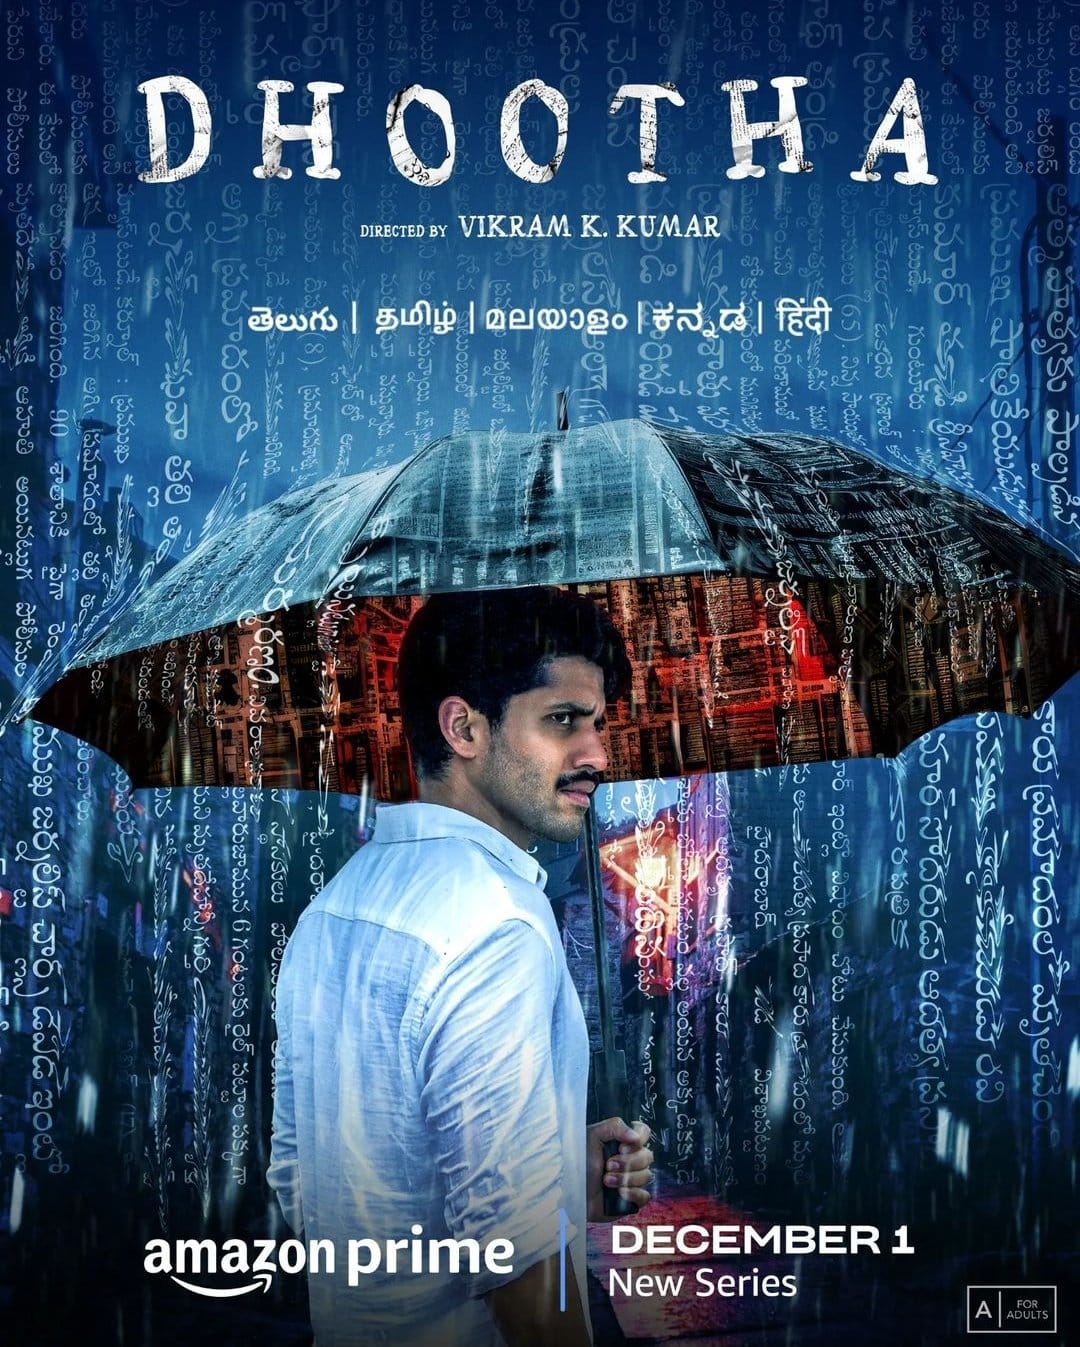 Naga Chaitanya’s Dhootha Amazon Prime Video Release Date: Know Everything about Cast, Plot, Expectations and More